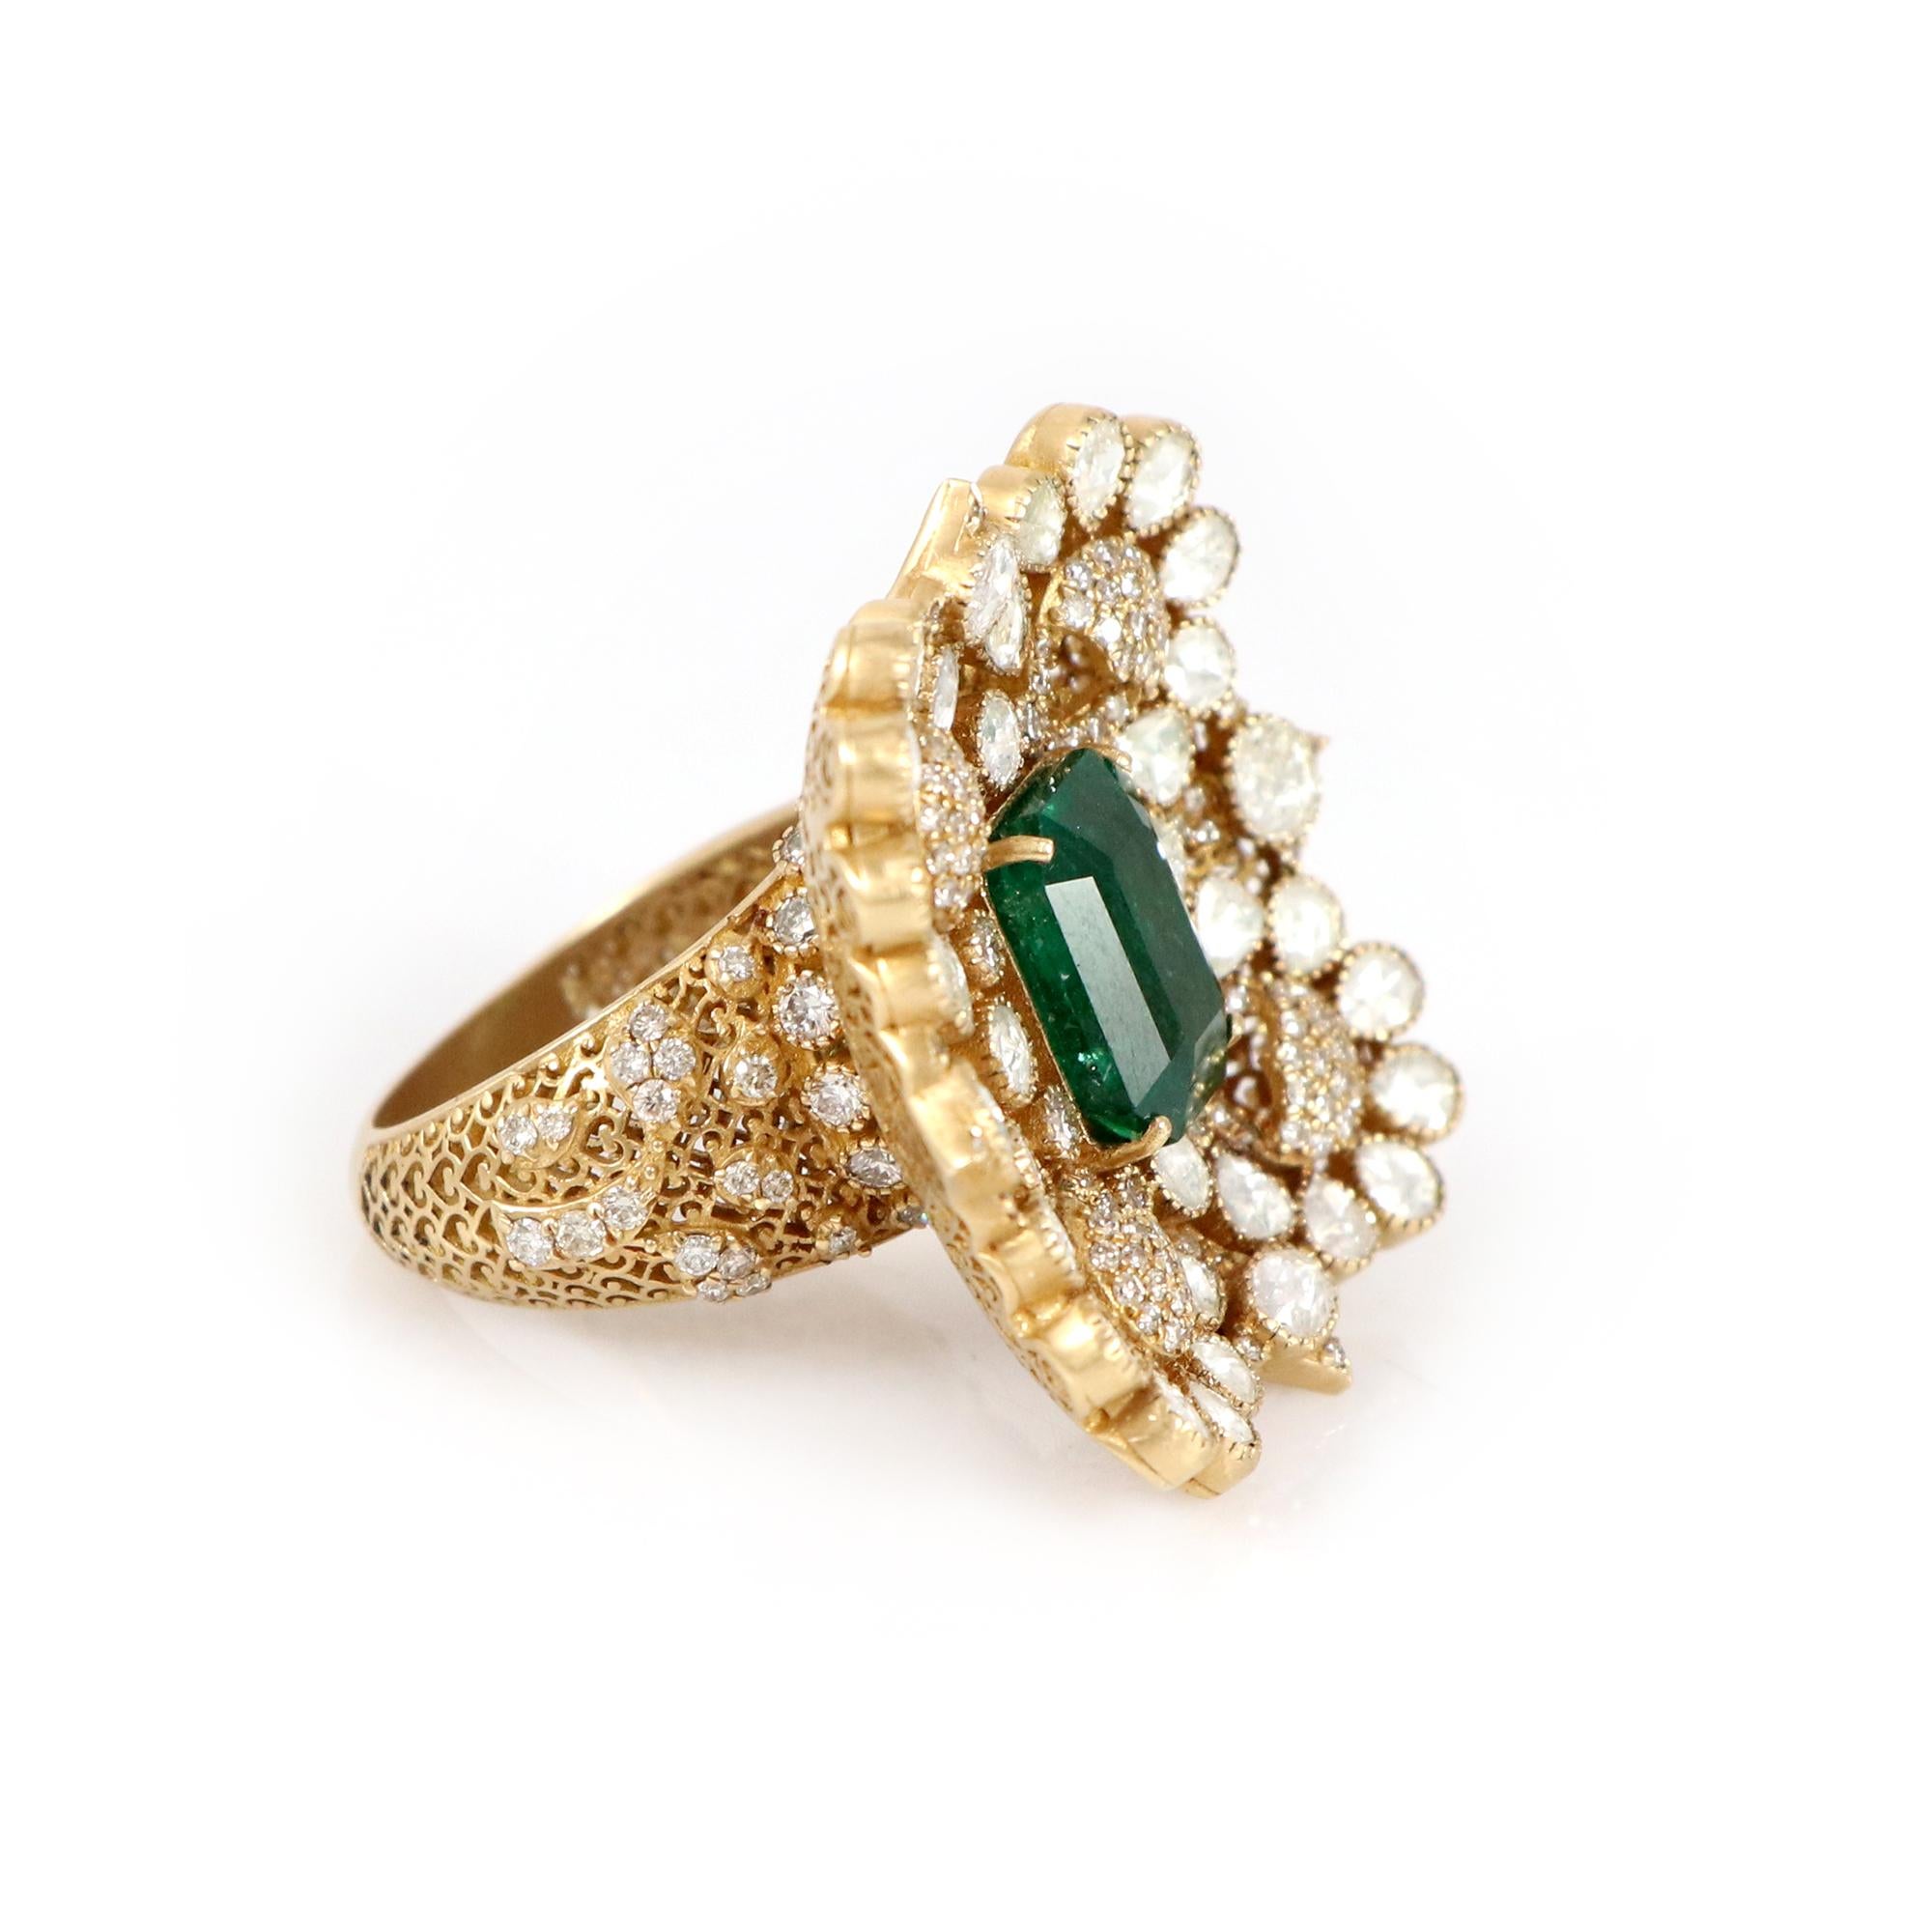 Introducing our timeless 18K yellow gold ring, graced by a captivating emerald at its core and elegantly encircled by rose cut diamonds, exuding unparalleled refinement. The lush green of the Zambian emerald symbolizes abundance, while the delicate